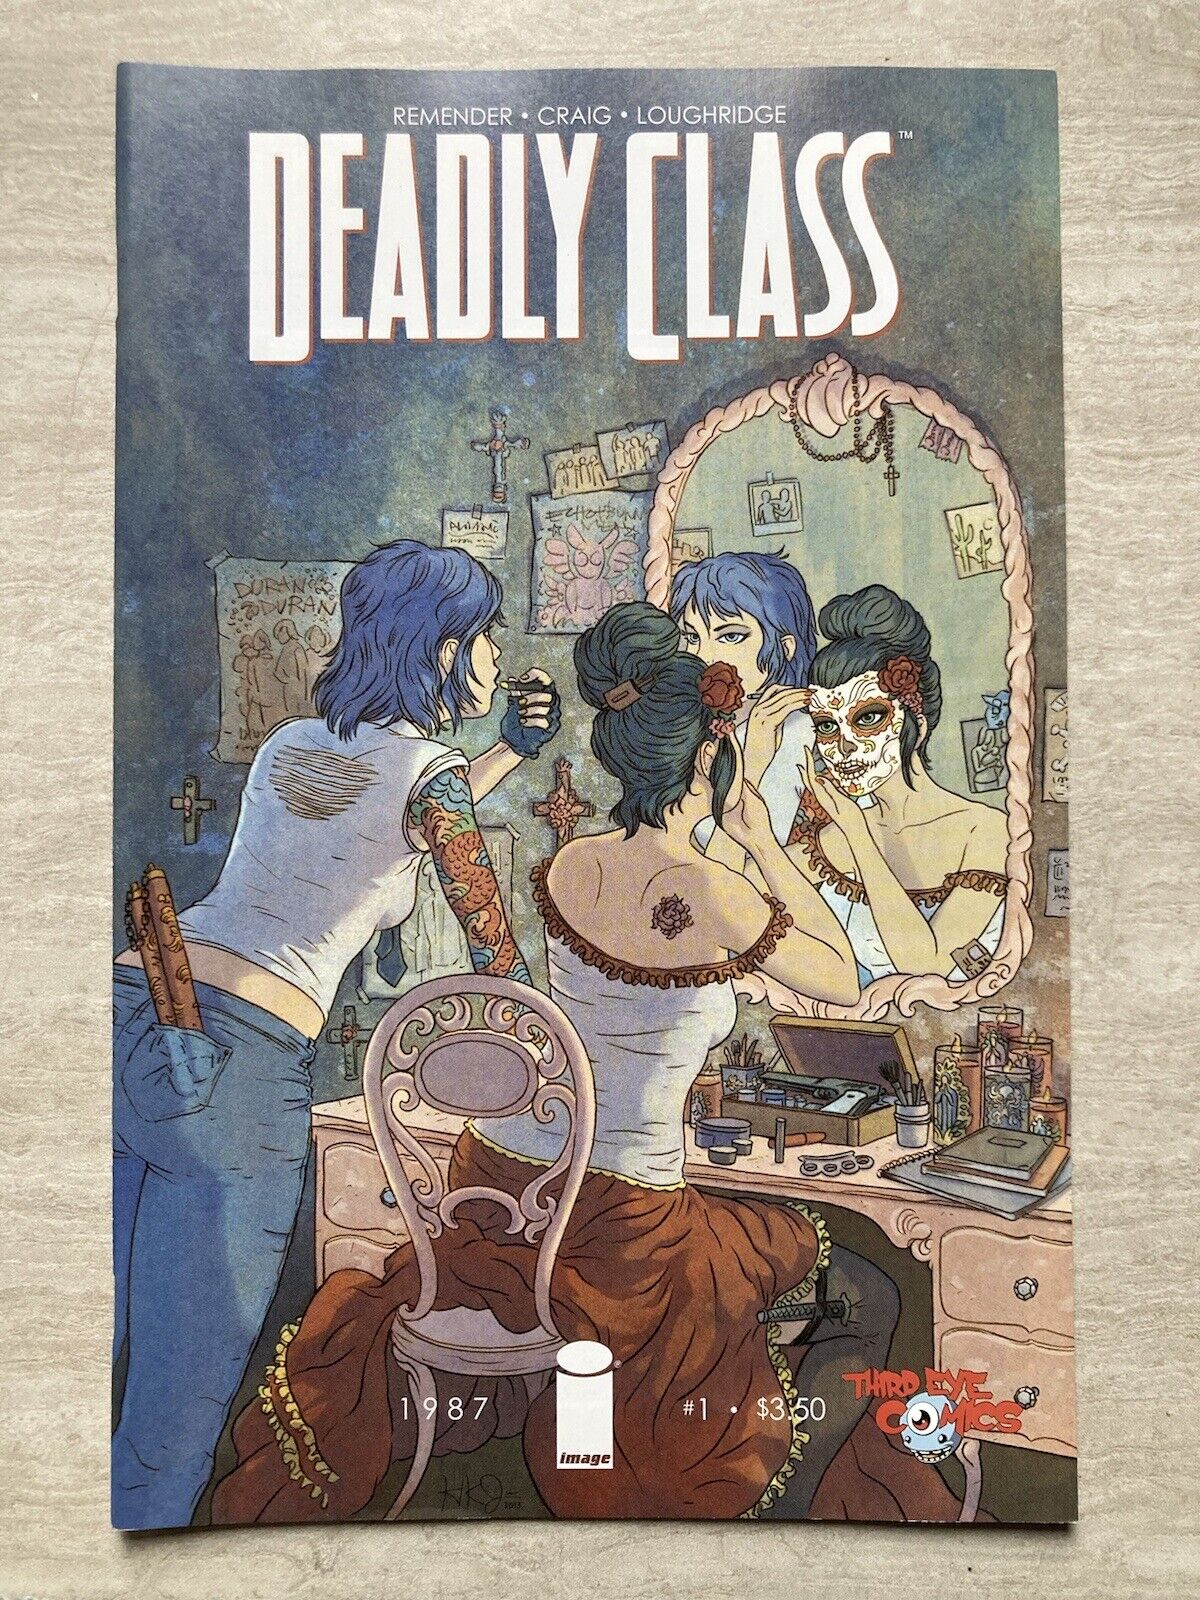 Deadly Class #1 (Image Comics 2014) Third Eye Comics Store Exclusive Variant